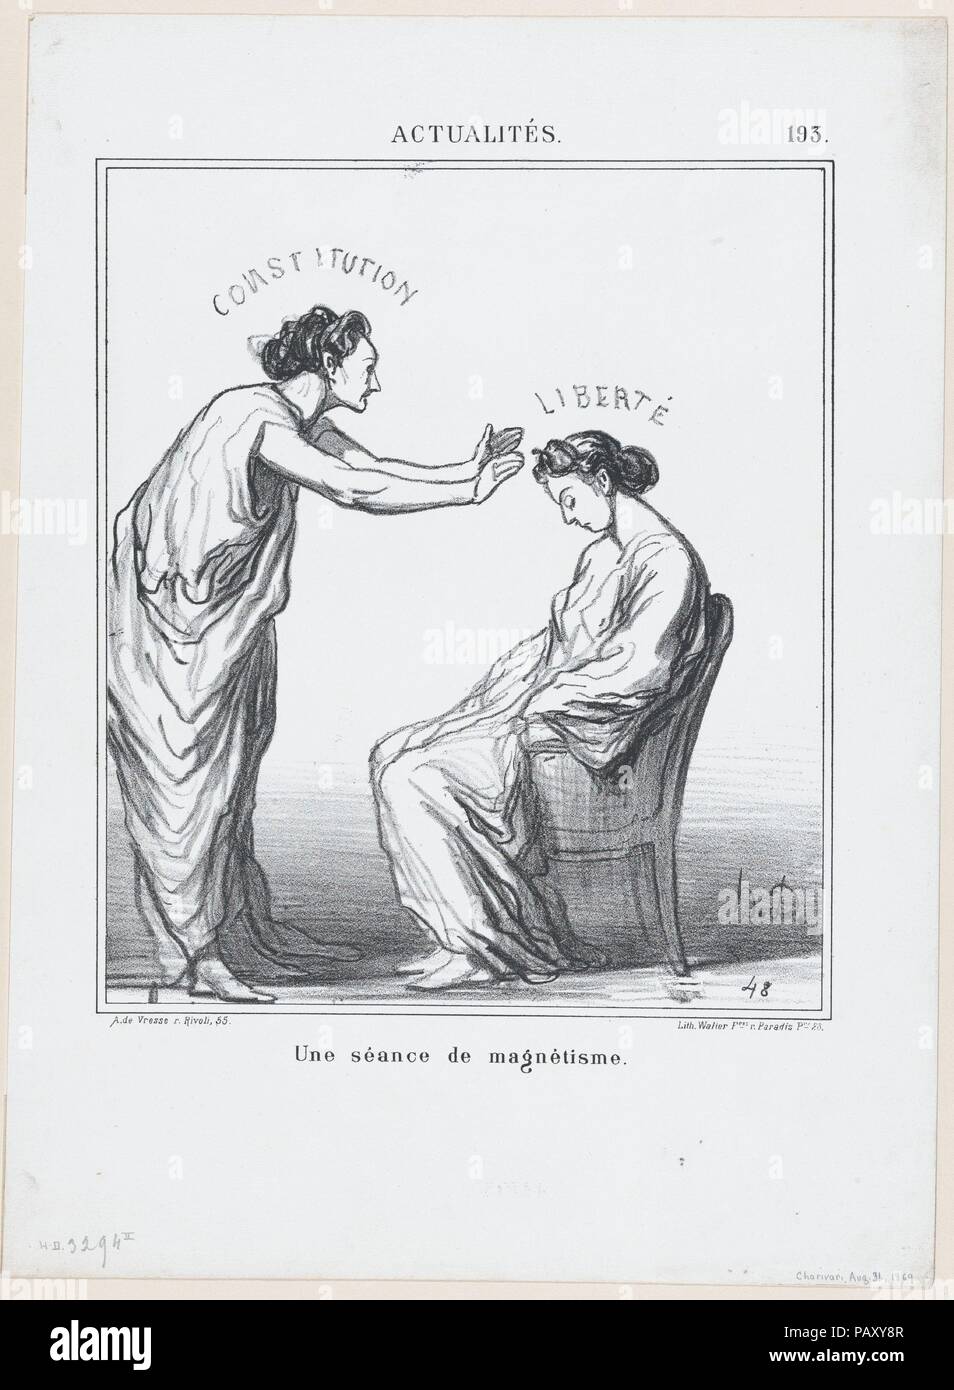 A session of hypnotism, from 'News of the day,' published in Le Charivari, August 31, 1869. Artist: Honoré Daumier (French, Marseilles 1808-1879 Valmondois). Dimensions: Image: 9 7/16 × 8 1/16 in. (24 × 20.5 cm)  Sheet: 14 1/4 × 10 1/2 in. (36.2 × 26.6 cm). Printer: Walter Frères. Publisher: Arnaud de Vresse. Series/Portfolio: 'News of the day' (Actualités). Date: August 31, 1869. Museum: Metropolitan Museum of Art, New York, USA. Stock Photo